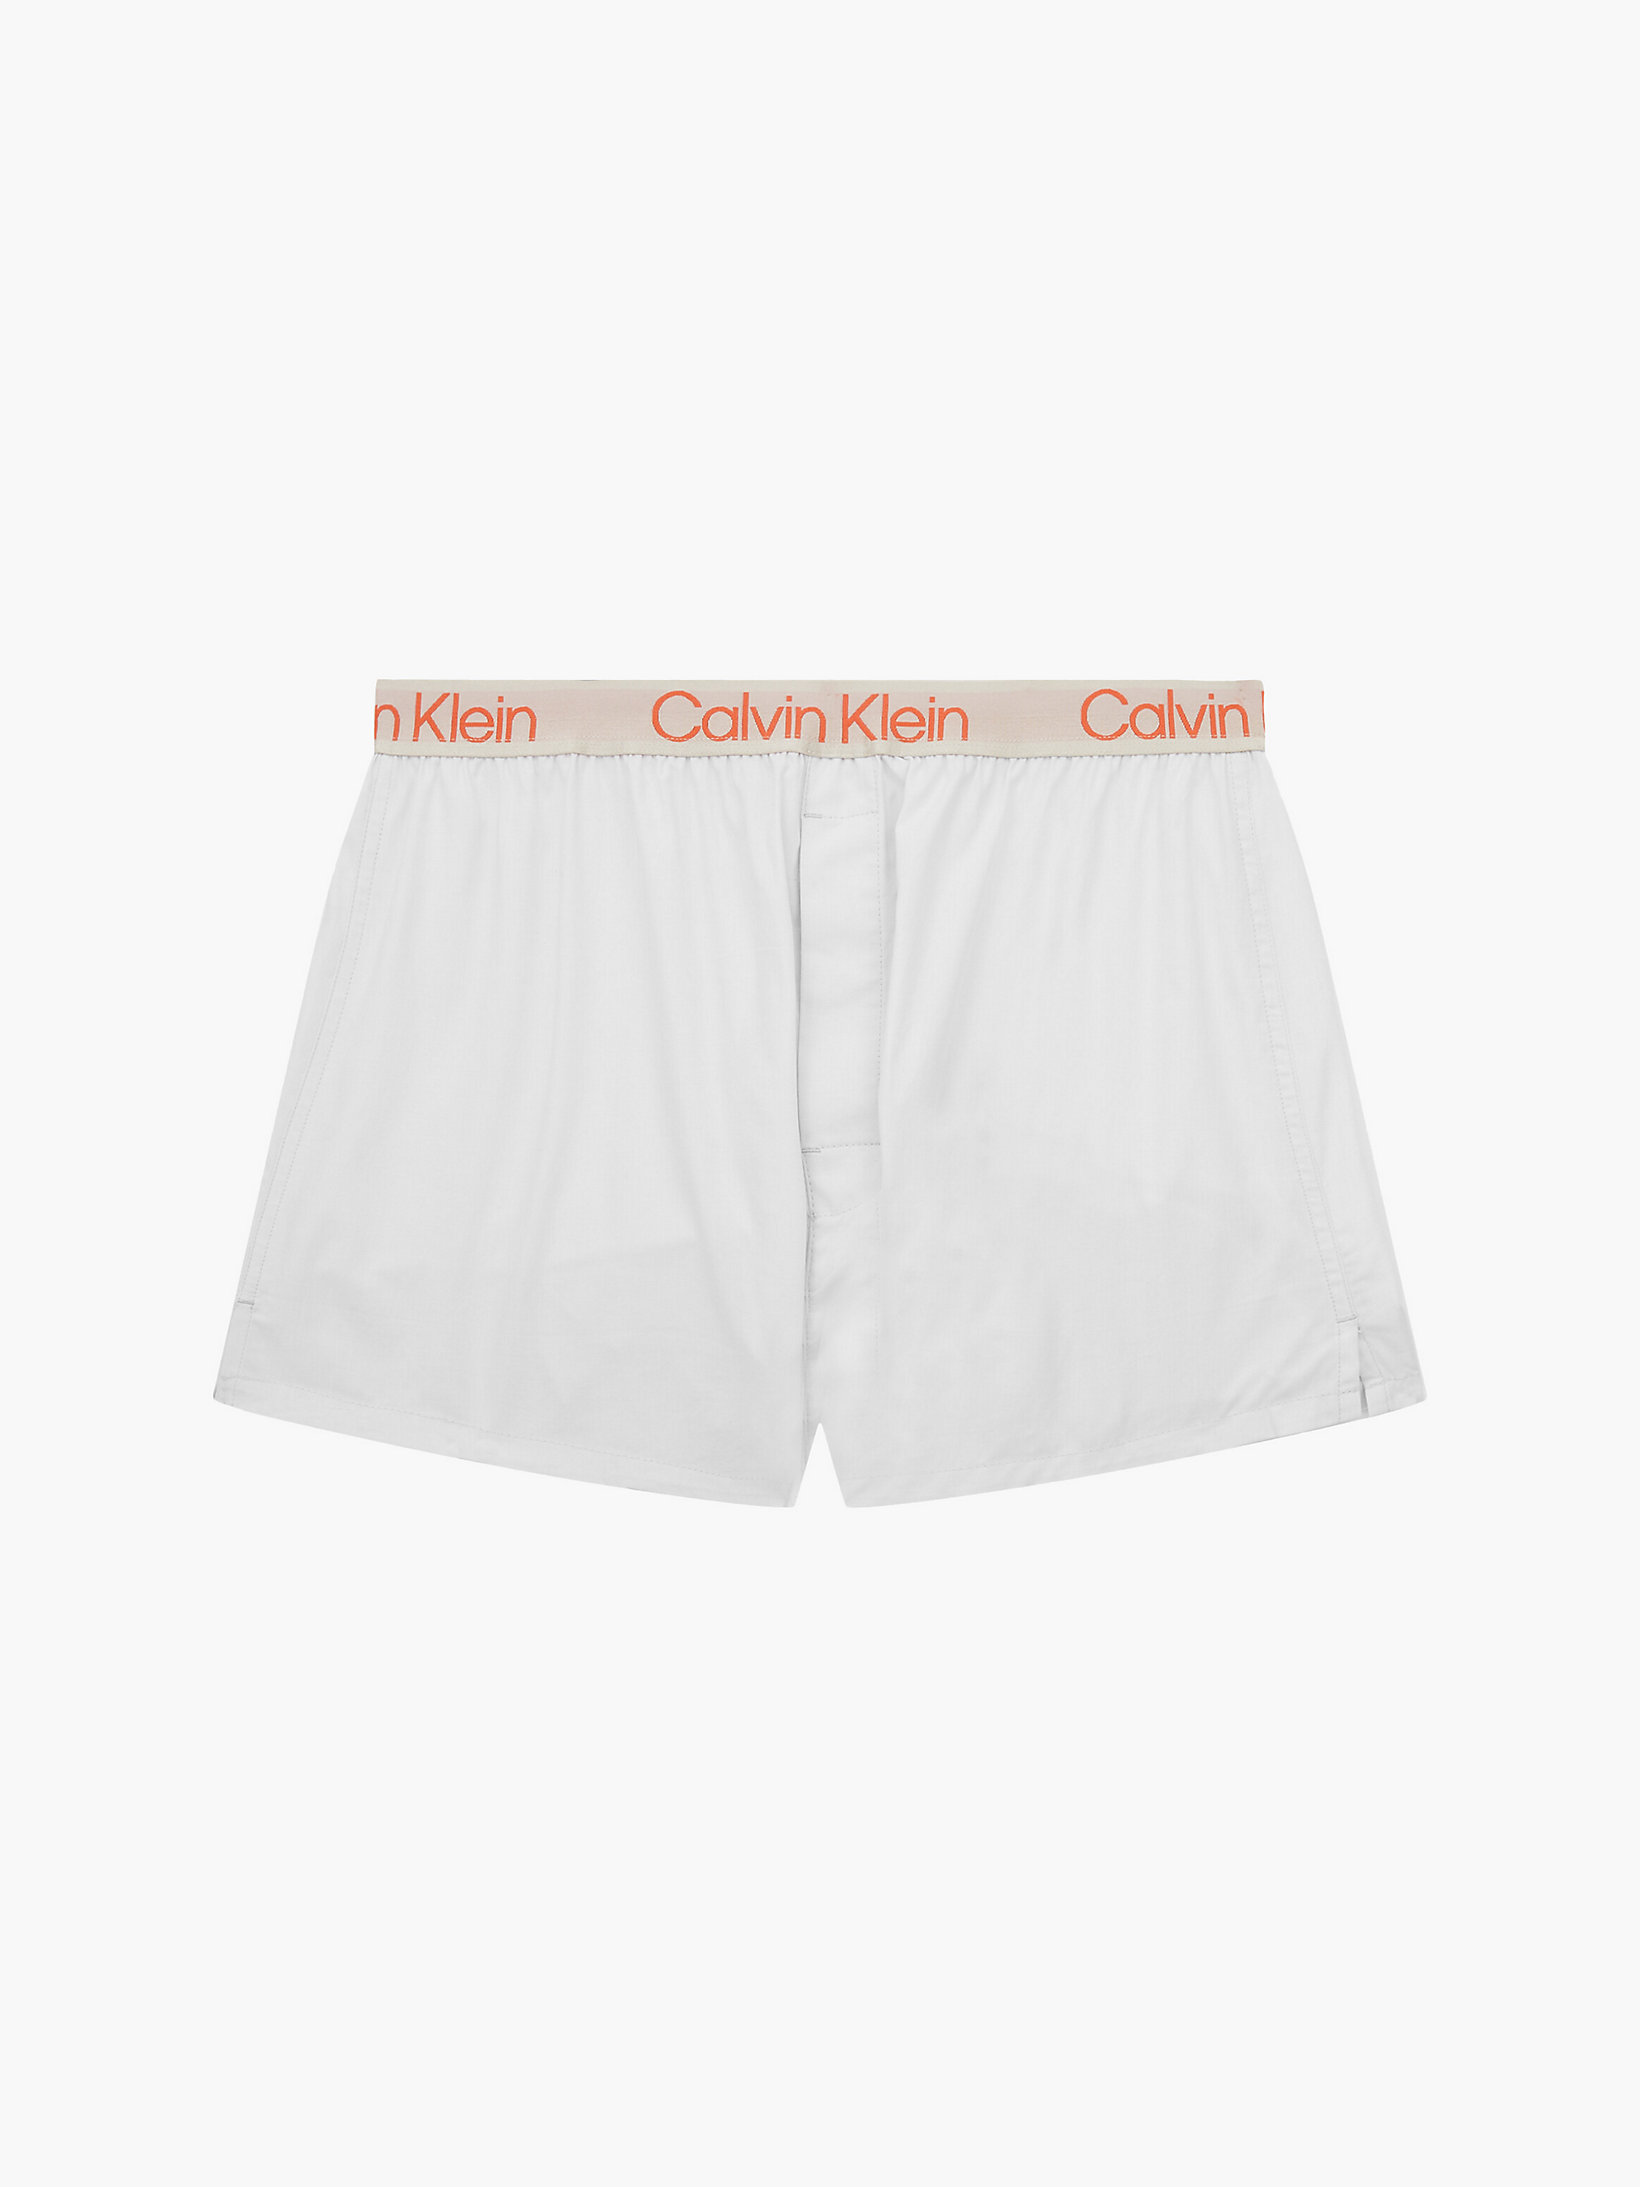 Slim Fit Boxers - Modern Structure Calvin Klein® | 000NB3012A203